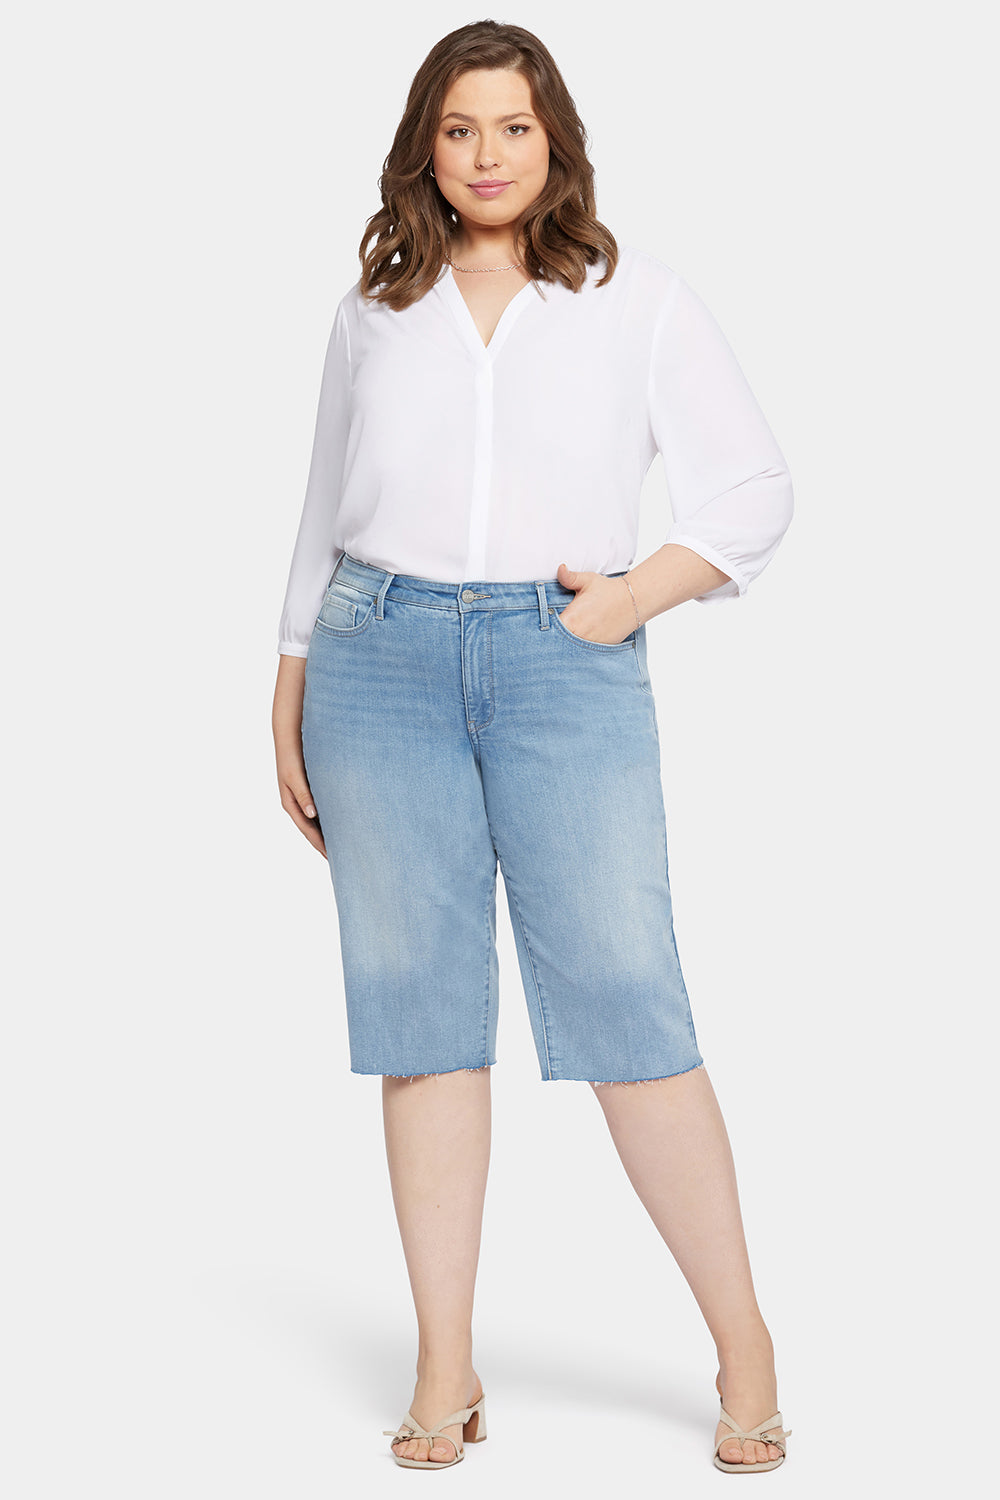 Kristie 80s Bermuda Denim Shorts In Plus Size With Pressed Creases And ...